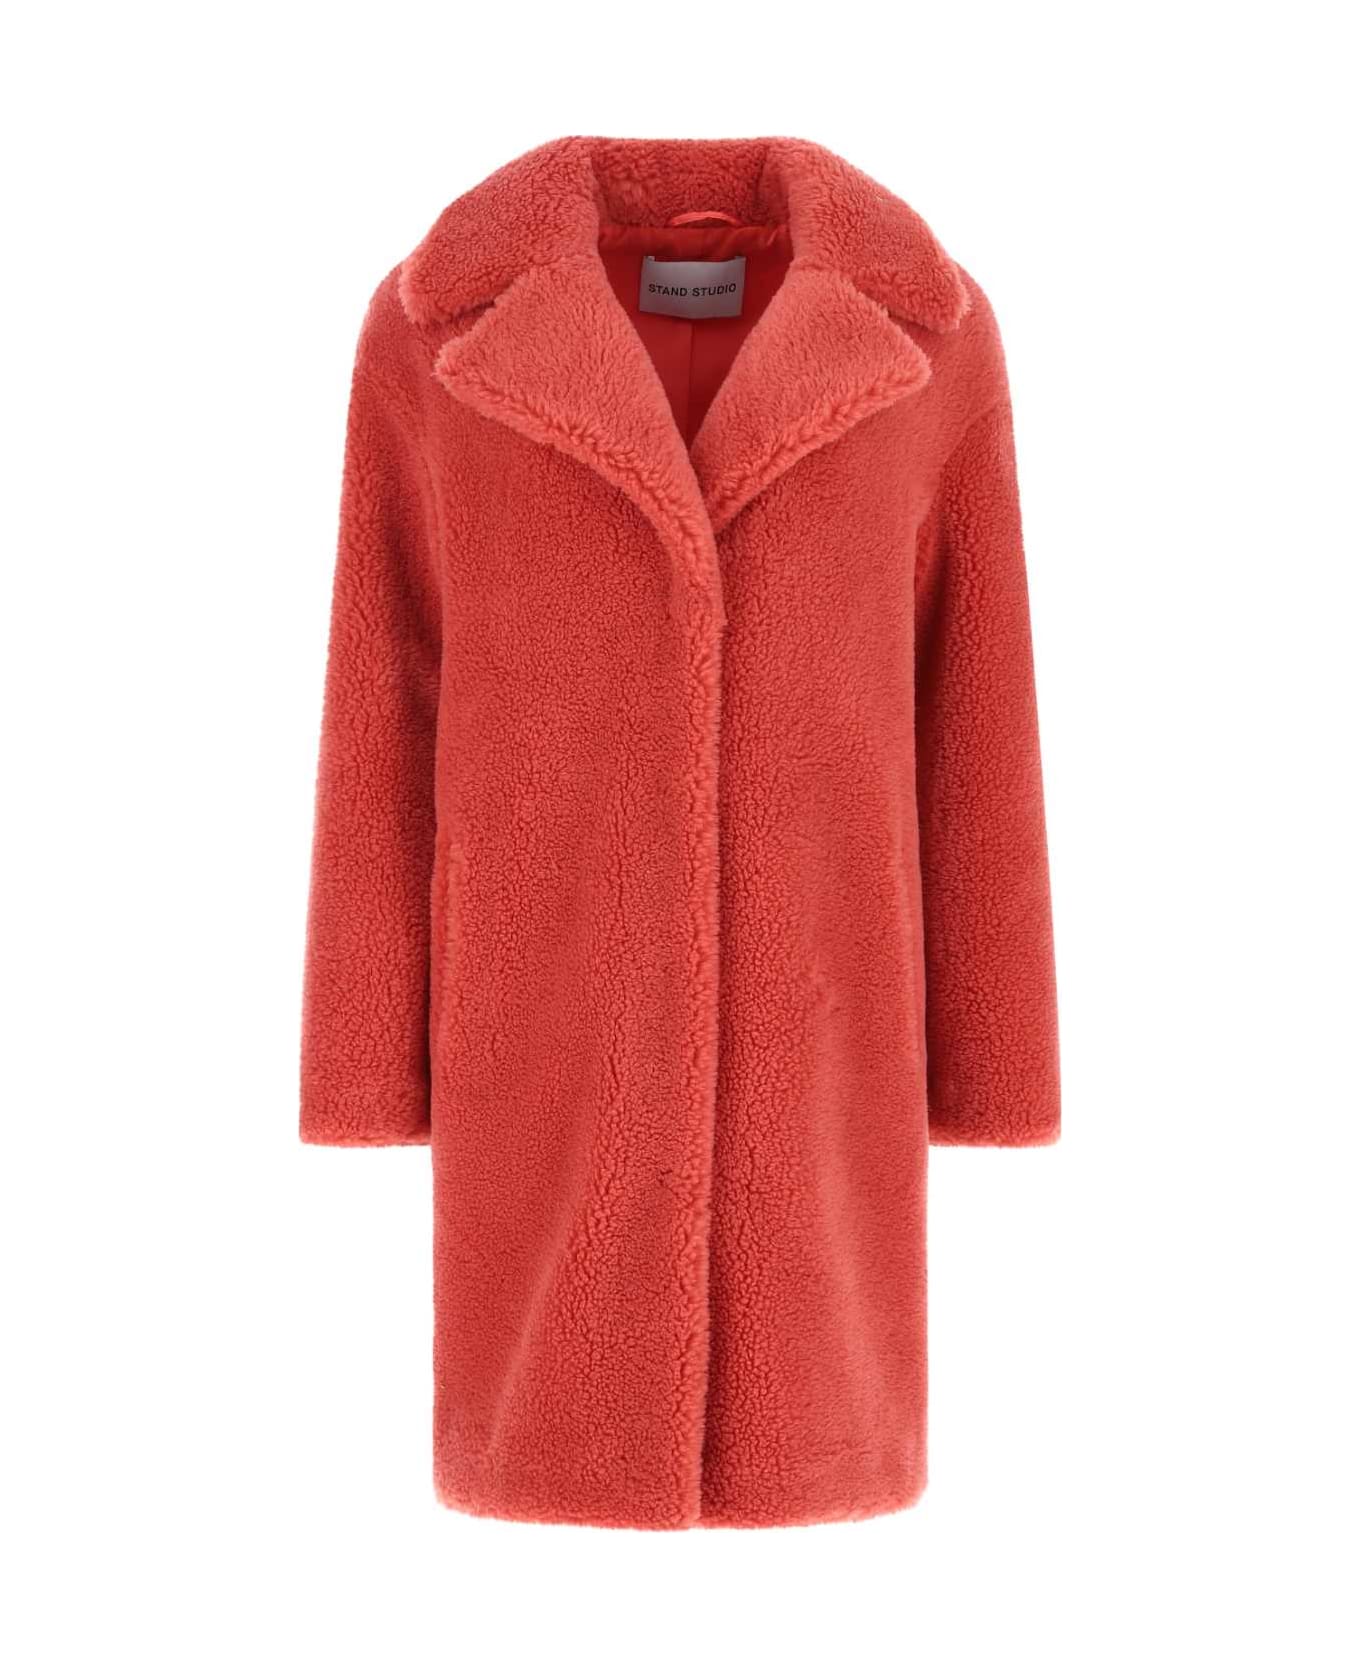 STAND STUDIO Light Red Teddy Camille Cocoon Coat - 24900